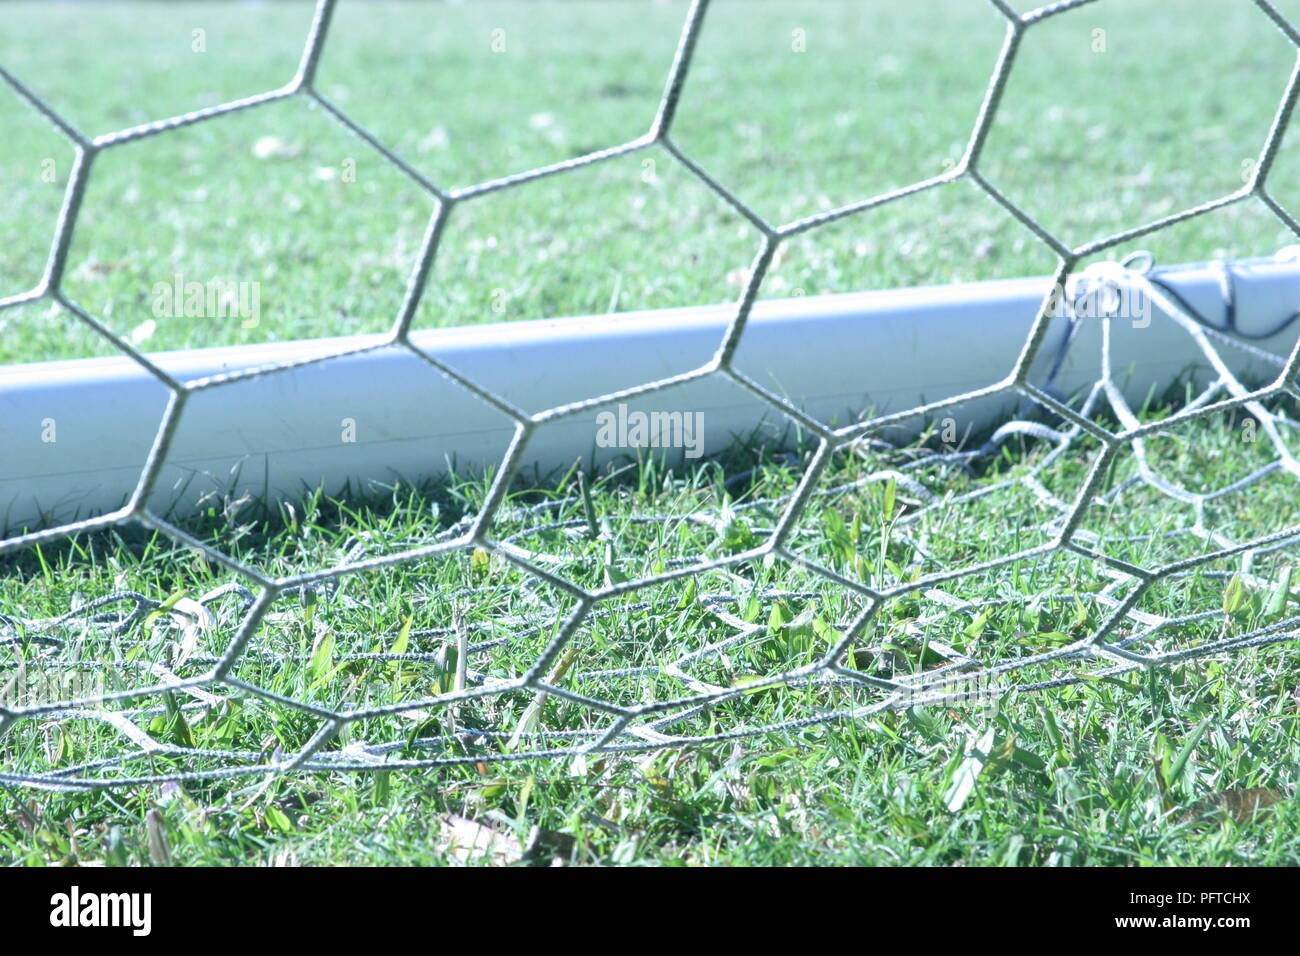 Detail of soccer goal with net resting on green grass of soccer pitch - landscape orientation Stock Photo